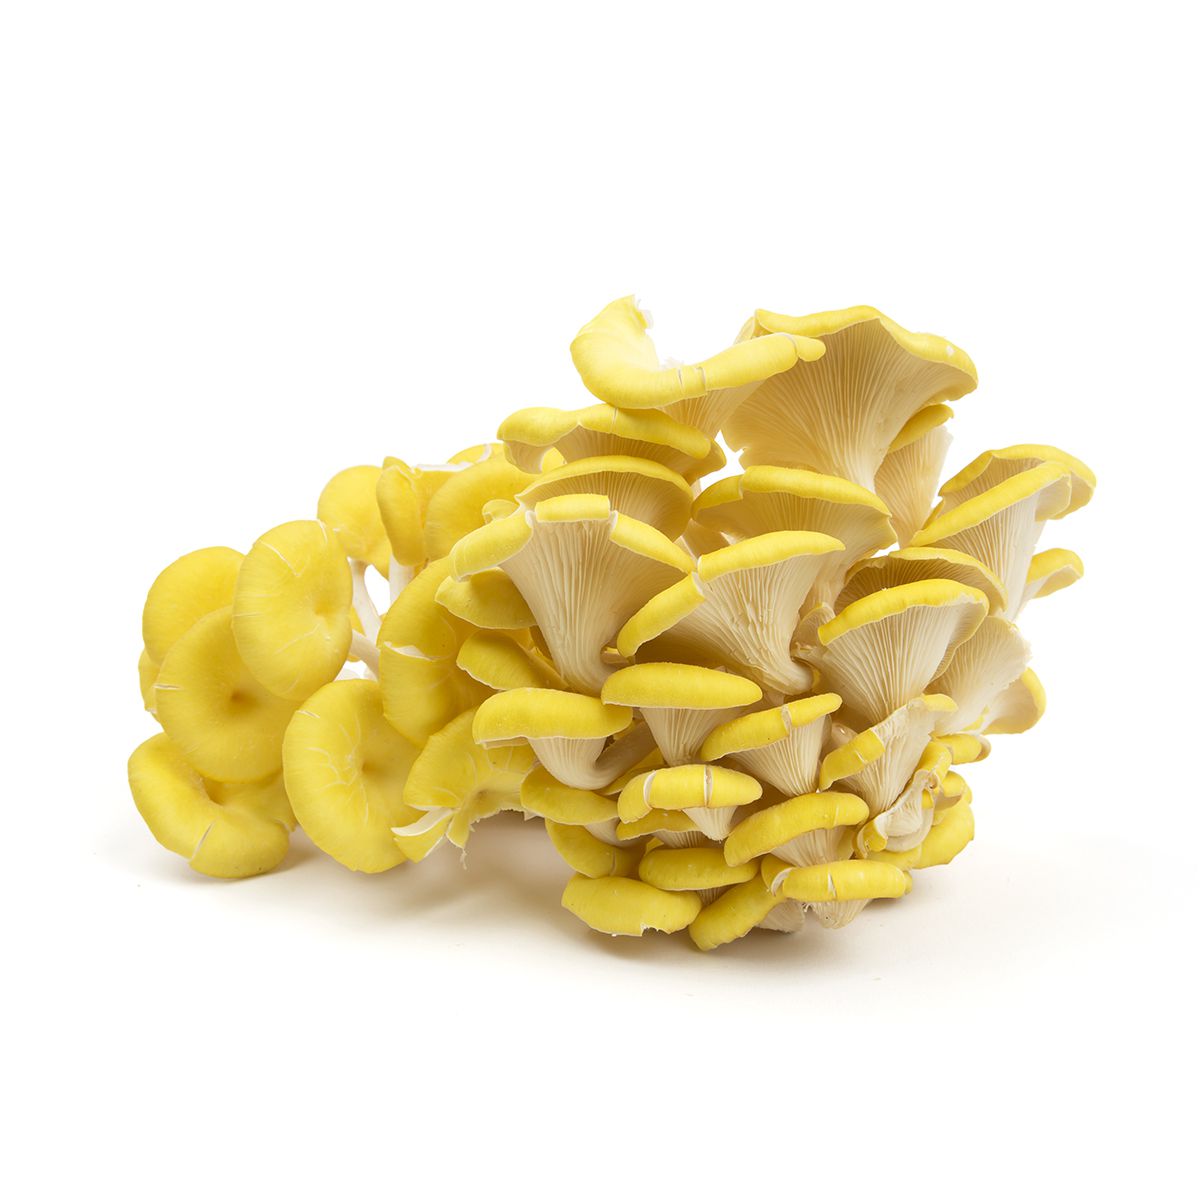 BoxNCase Yellow Oyster Mushrooms